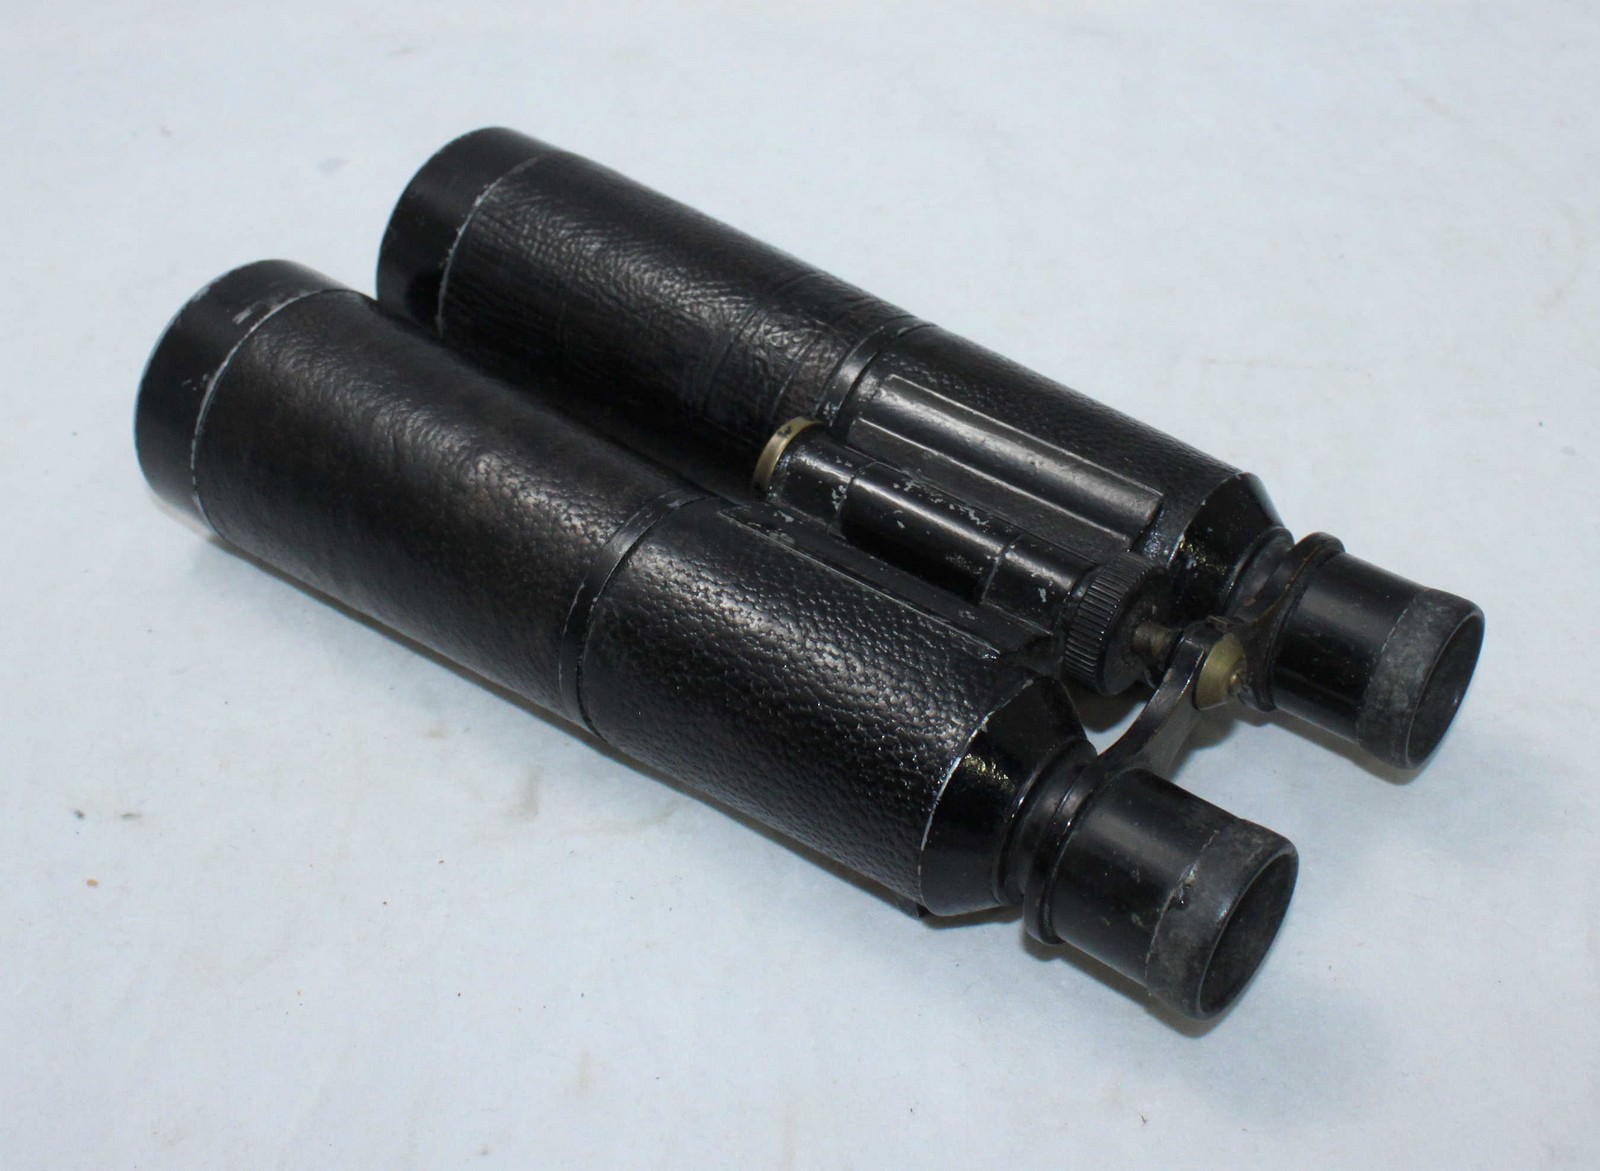 A pair of early 20th century German binoculars by Hensoldt-Wetzlar, with 10x magnification and - Bild 3 aus 3